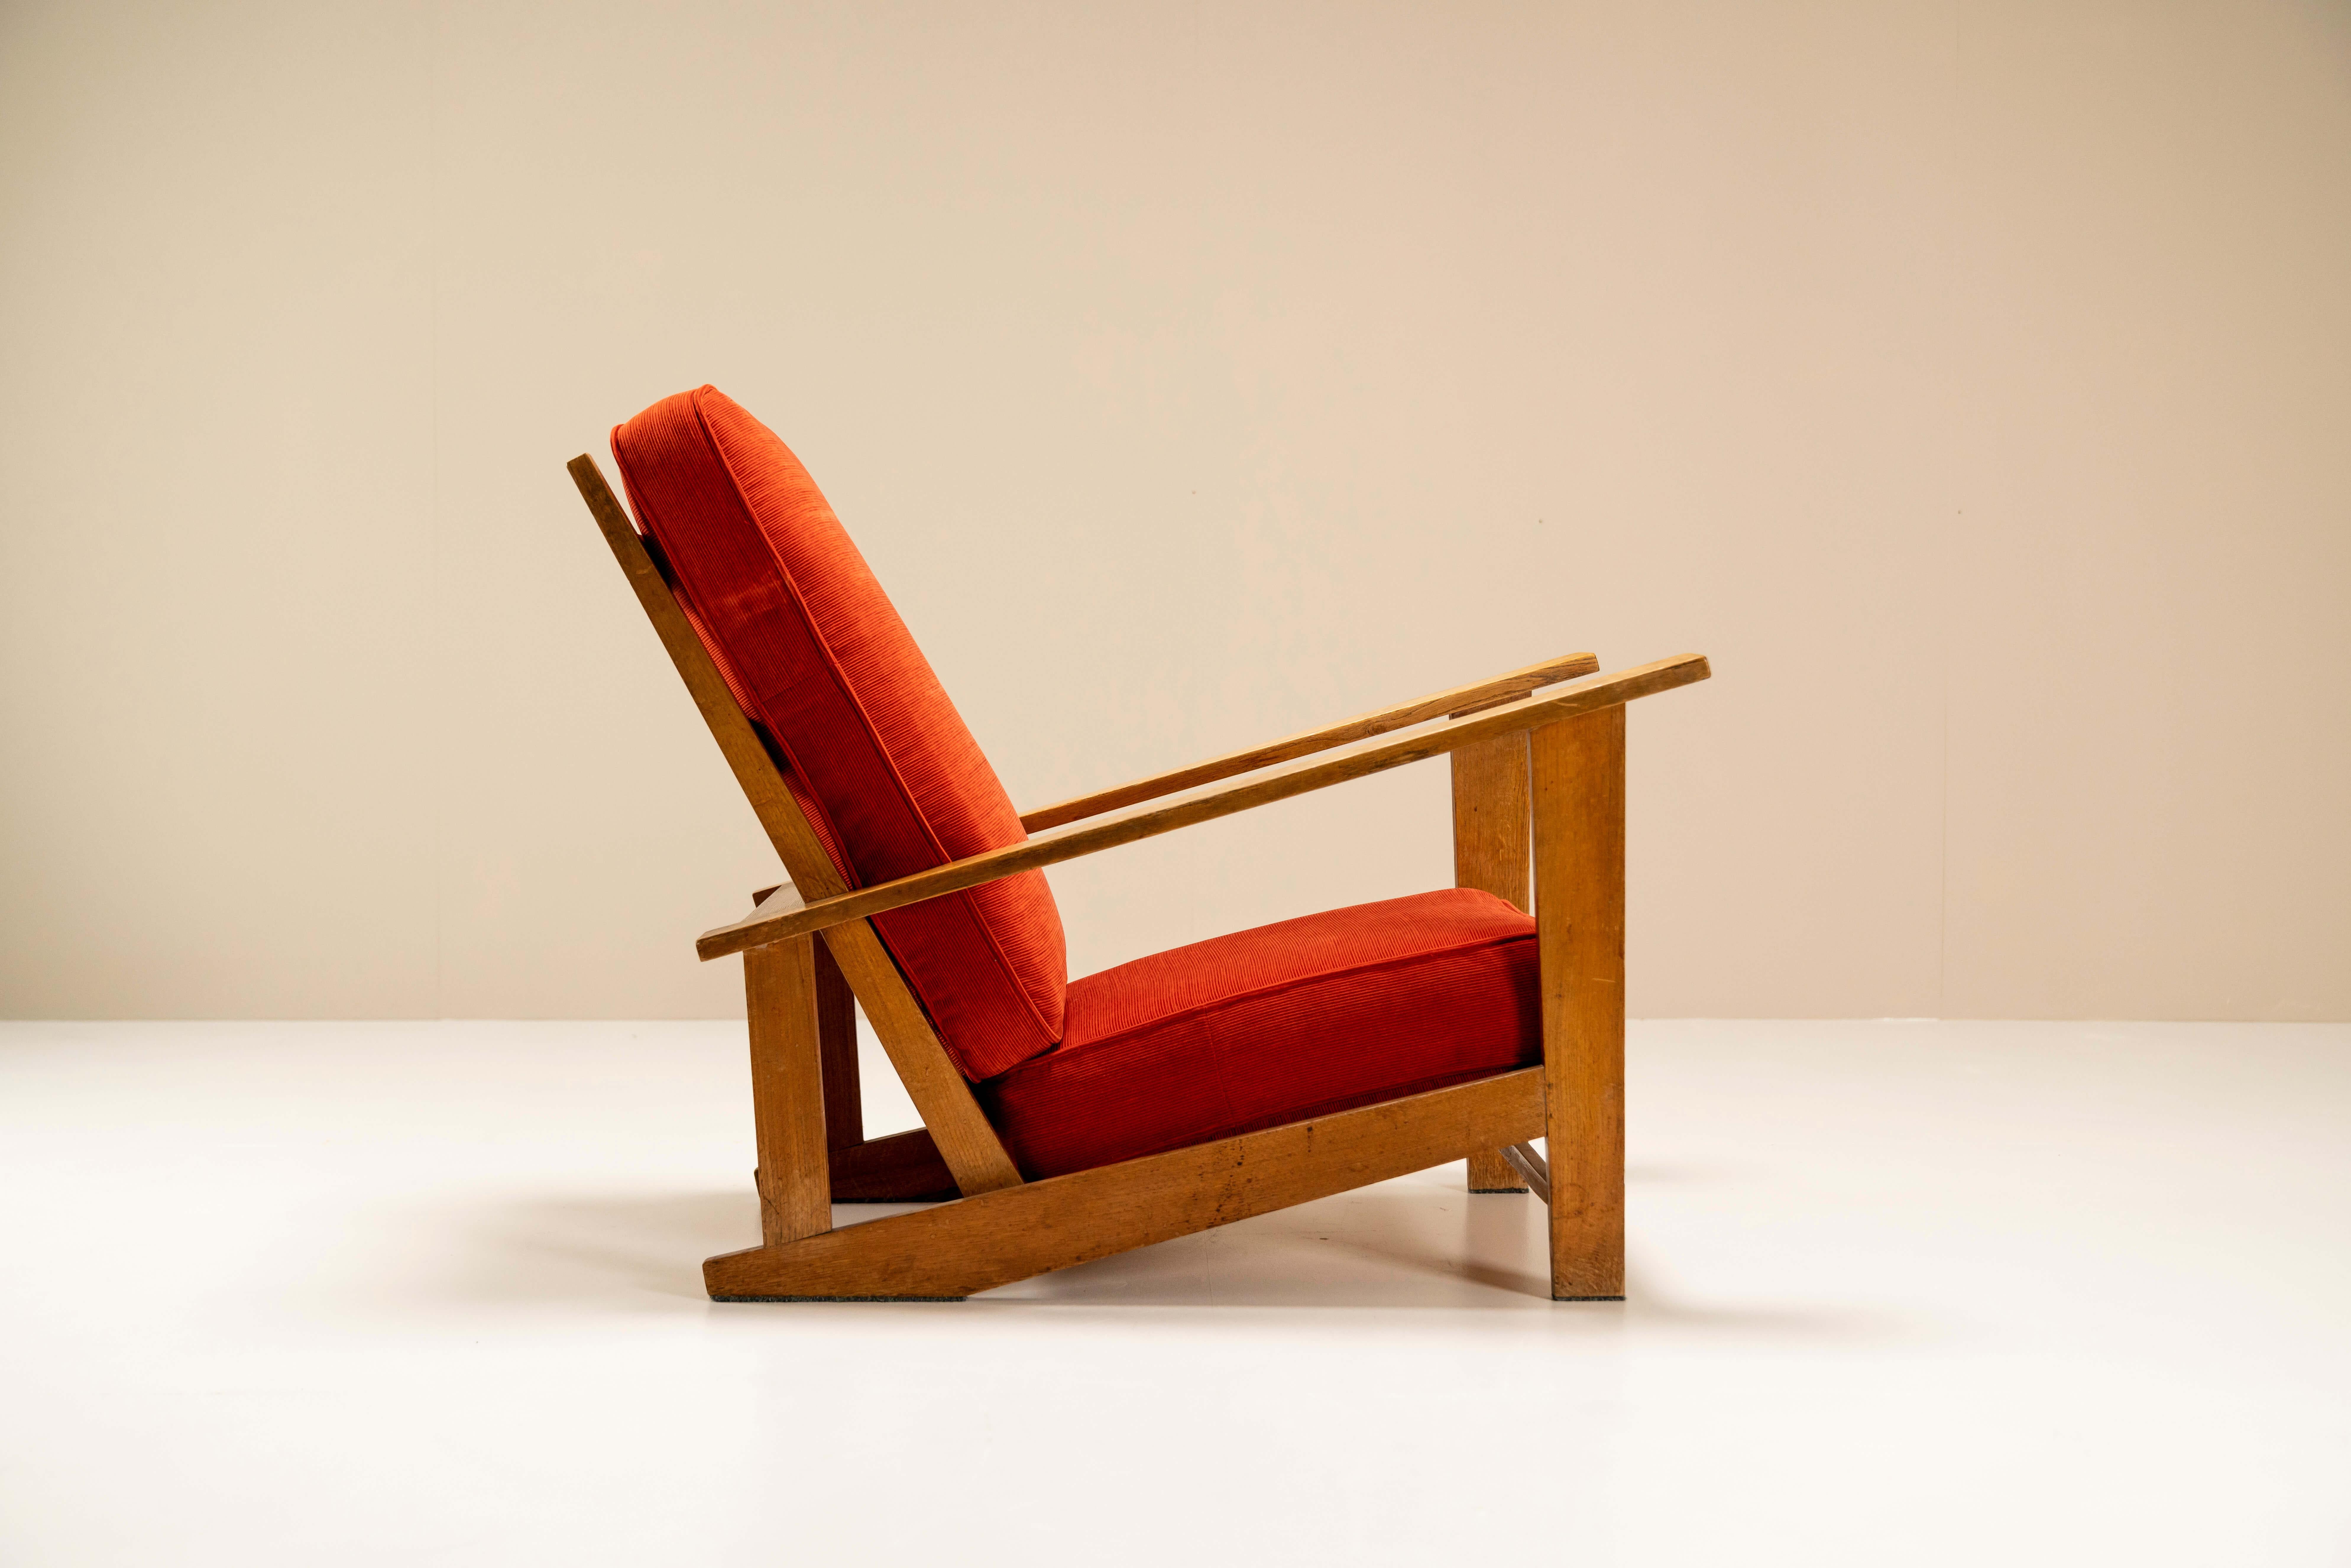 Dutch Lounge Chairs in Beech and Vermillion Upholstery Attr. to Groenekan 1950s For Sale 3